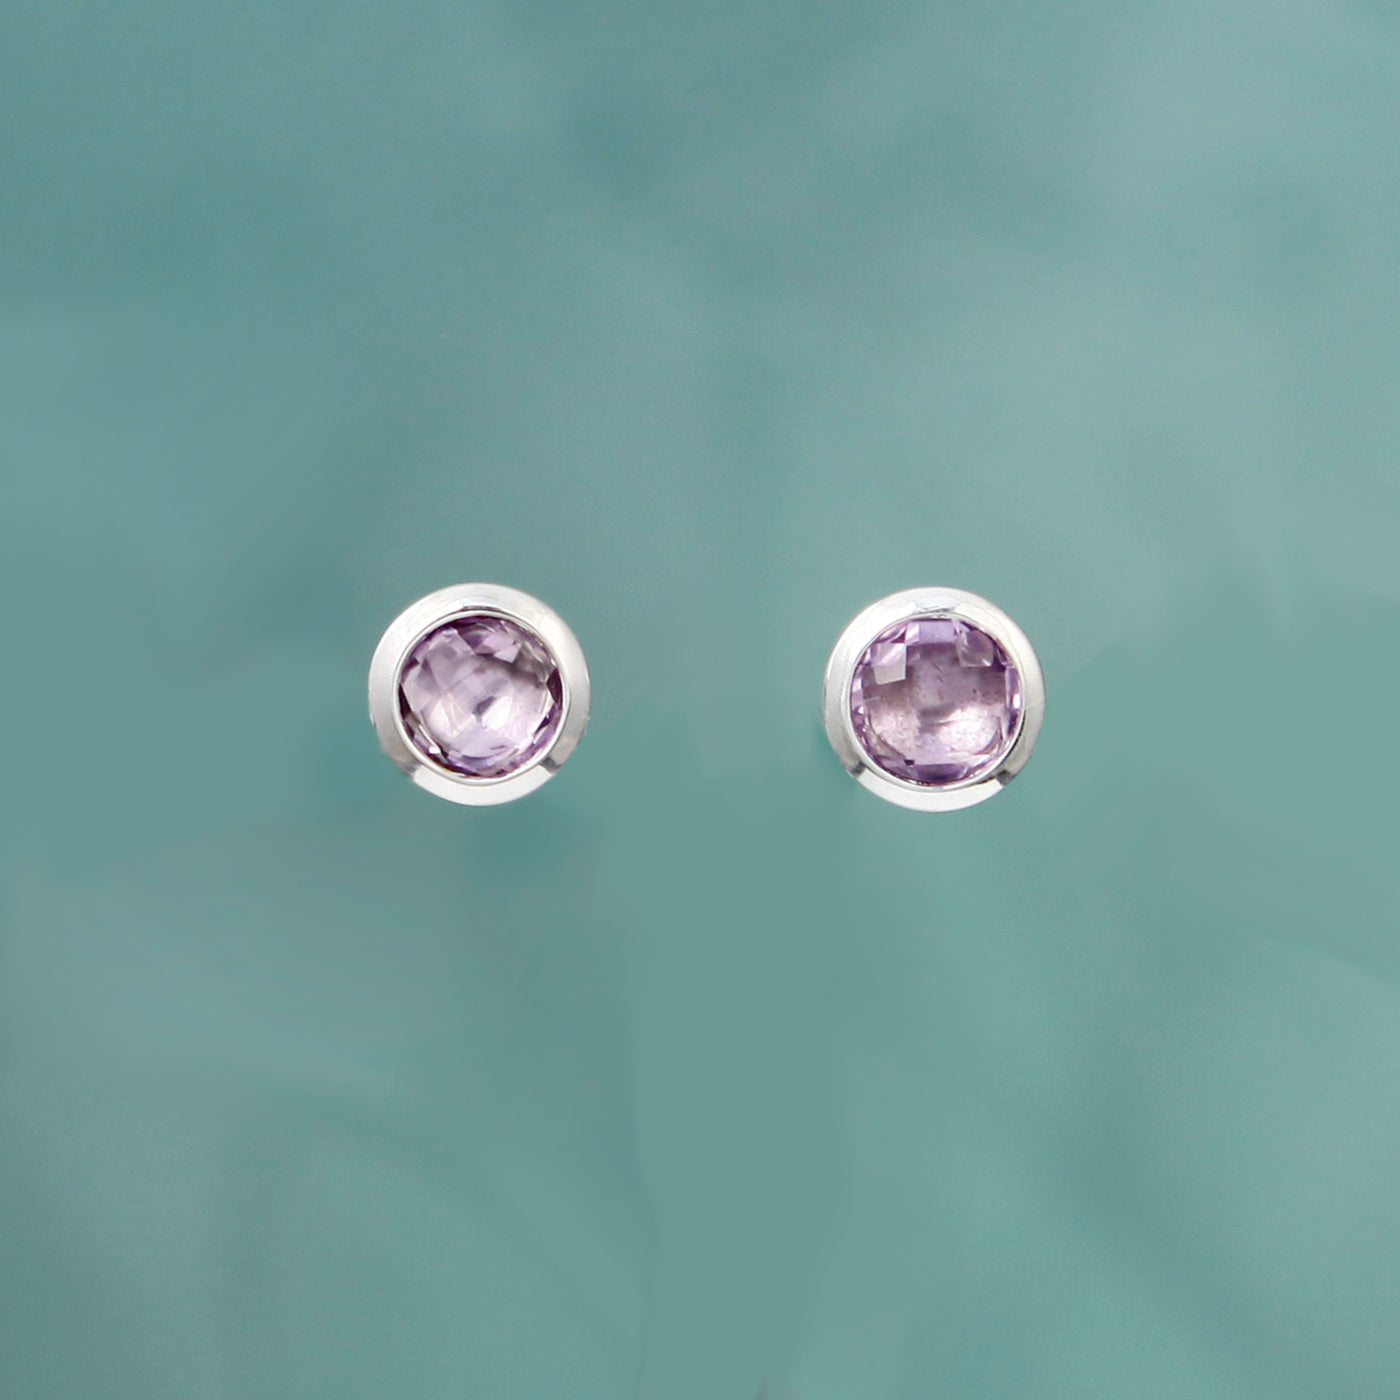 Photo of Silver and Amethyst Stud Earrings